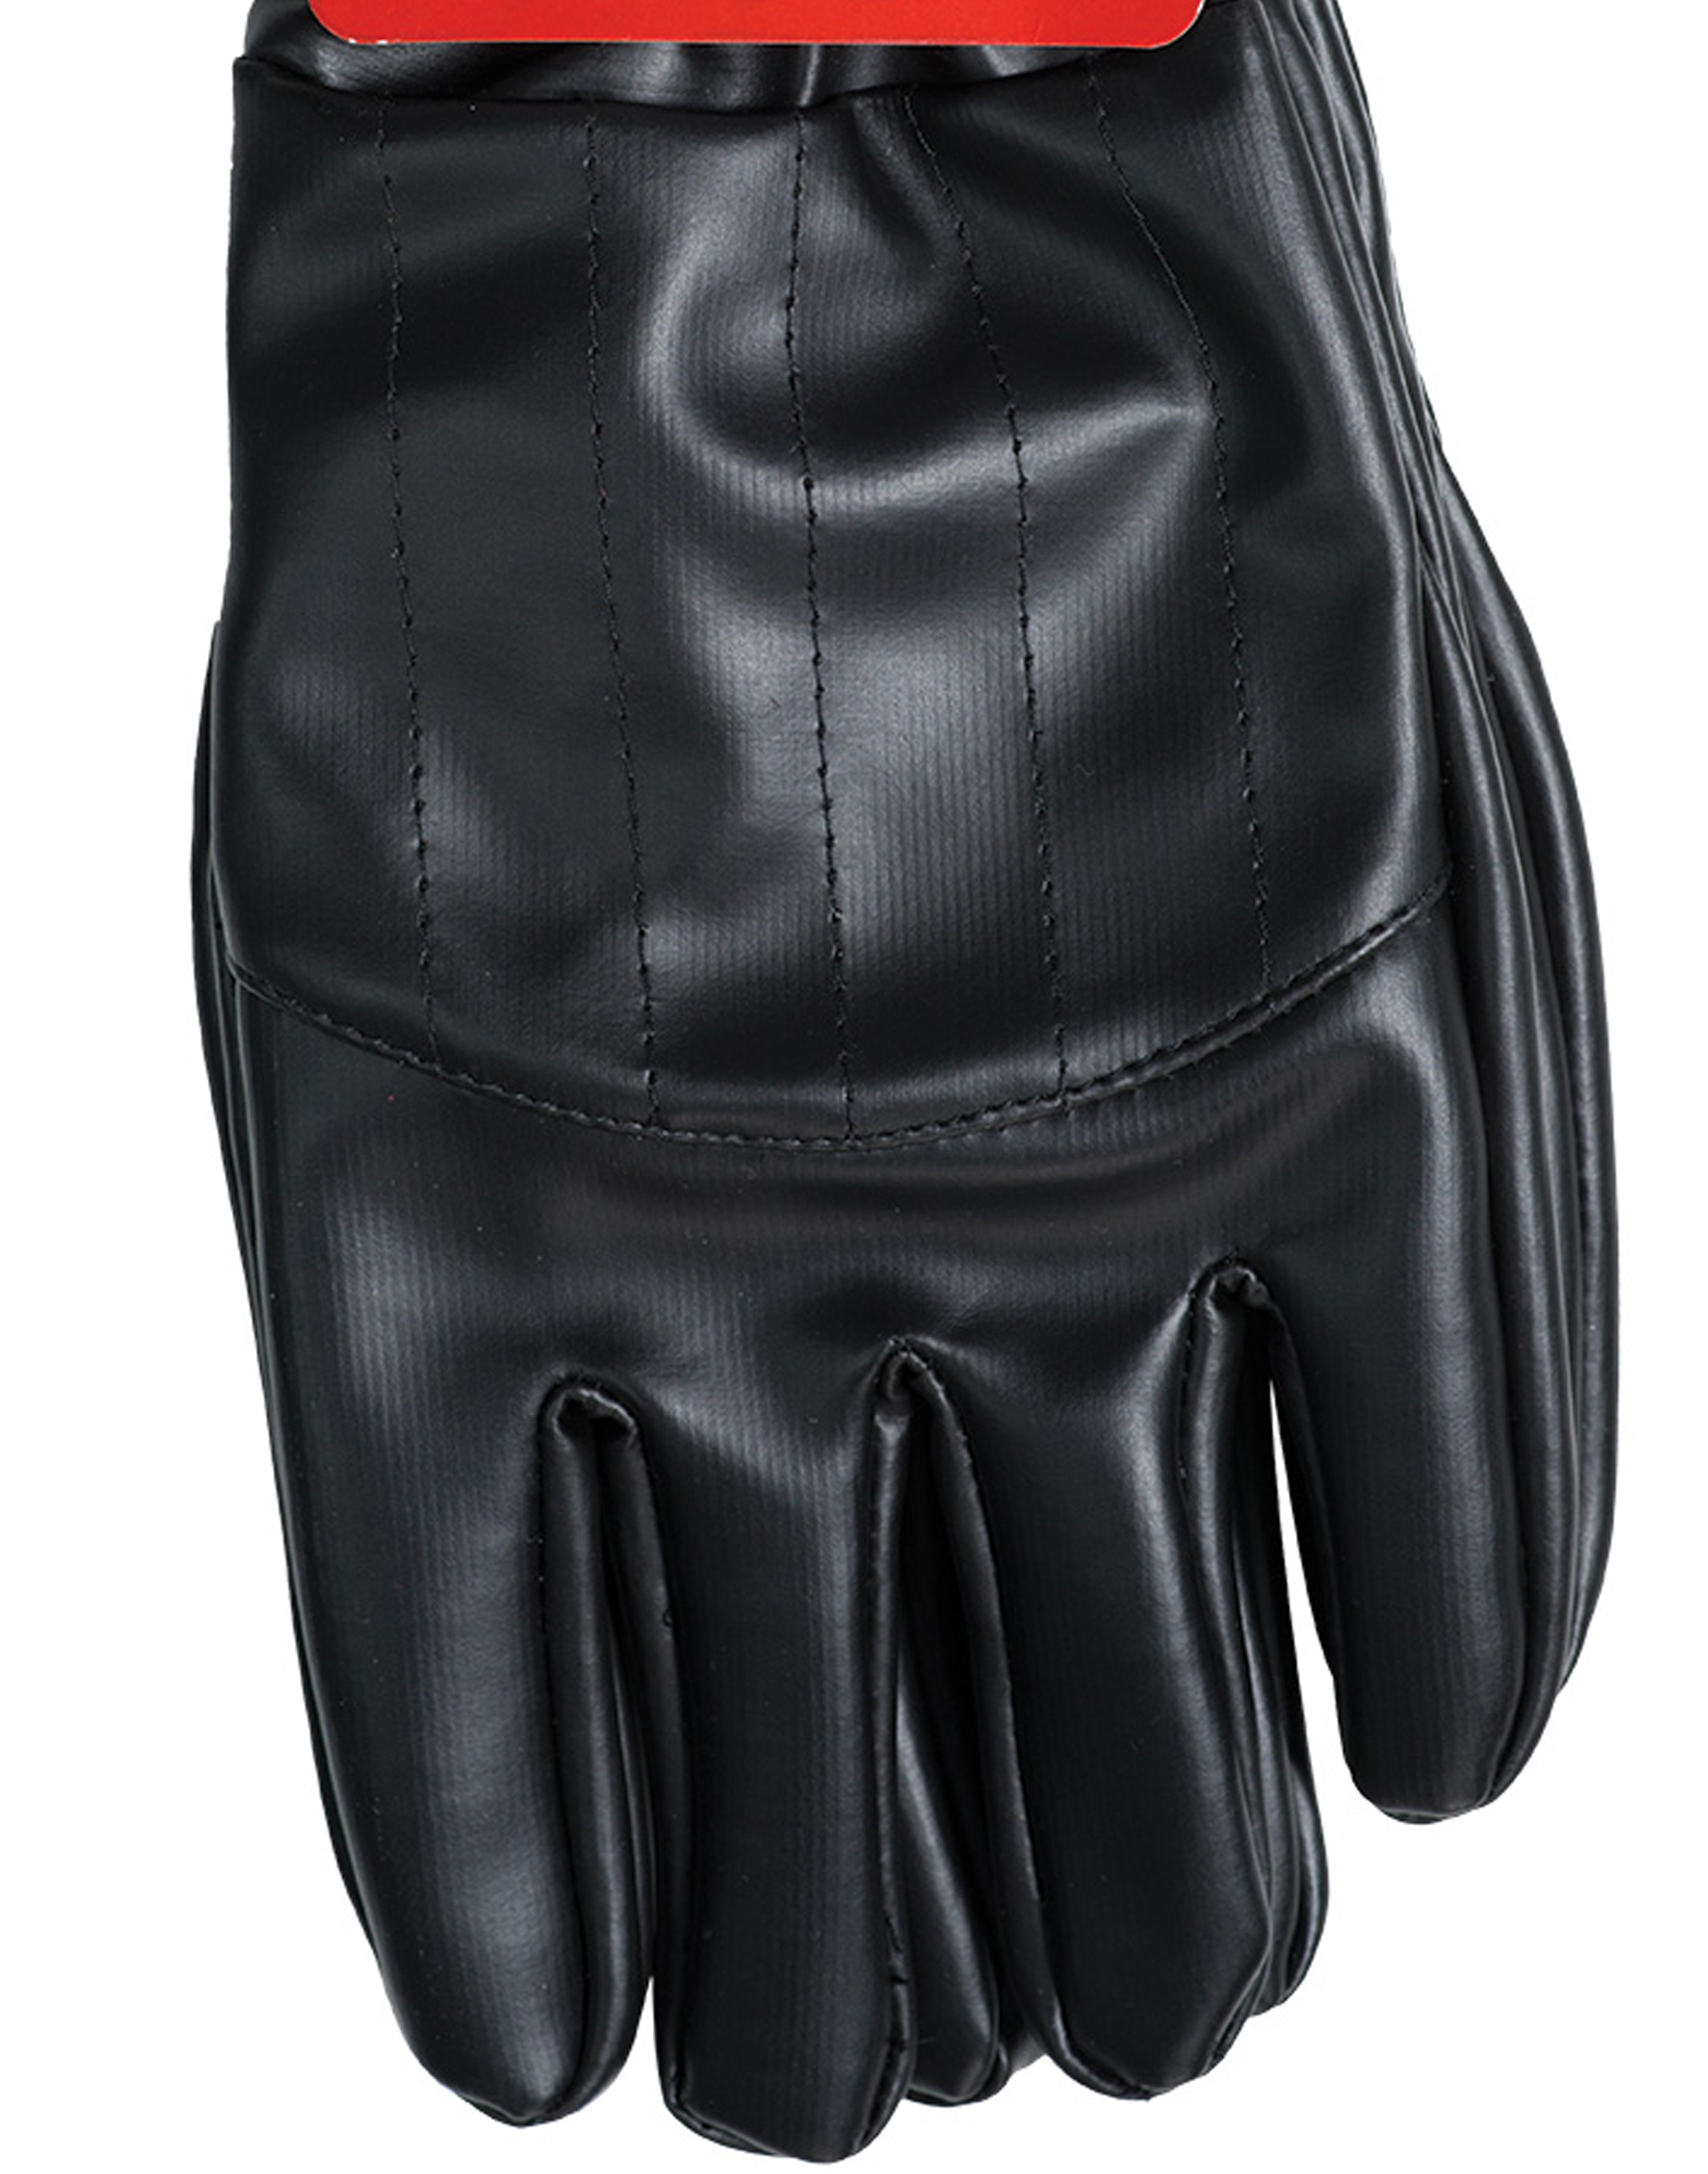 Star Wars The Force Awakens Kylo Ren Gloves Halloween Costume Accessory - image 2 of 2